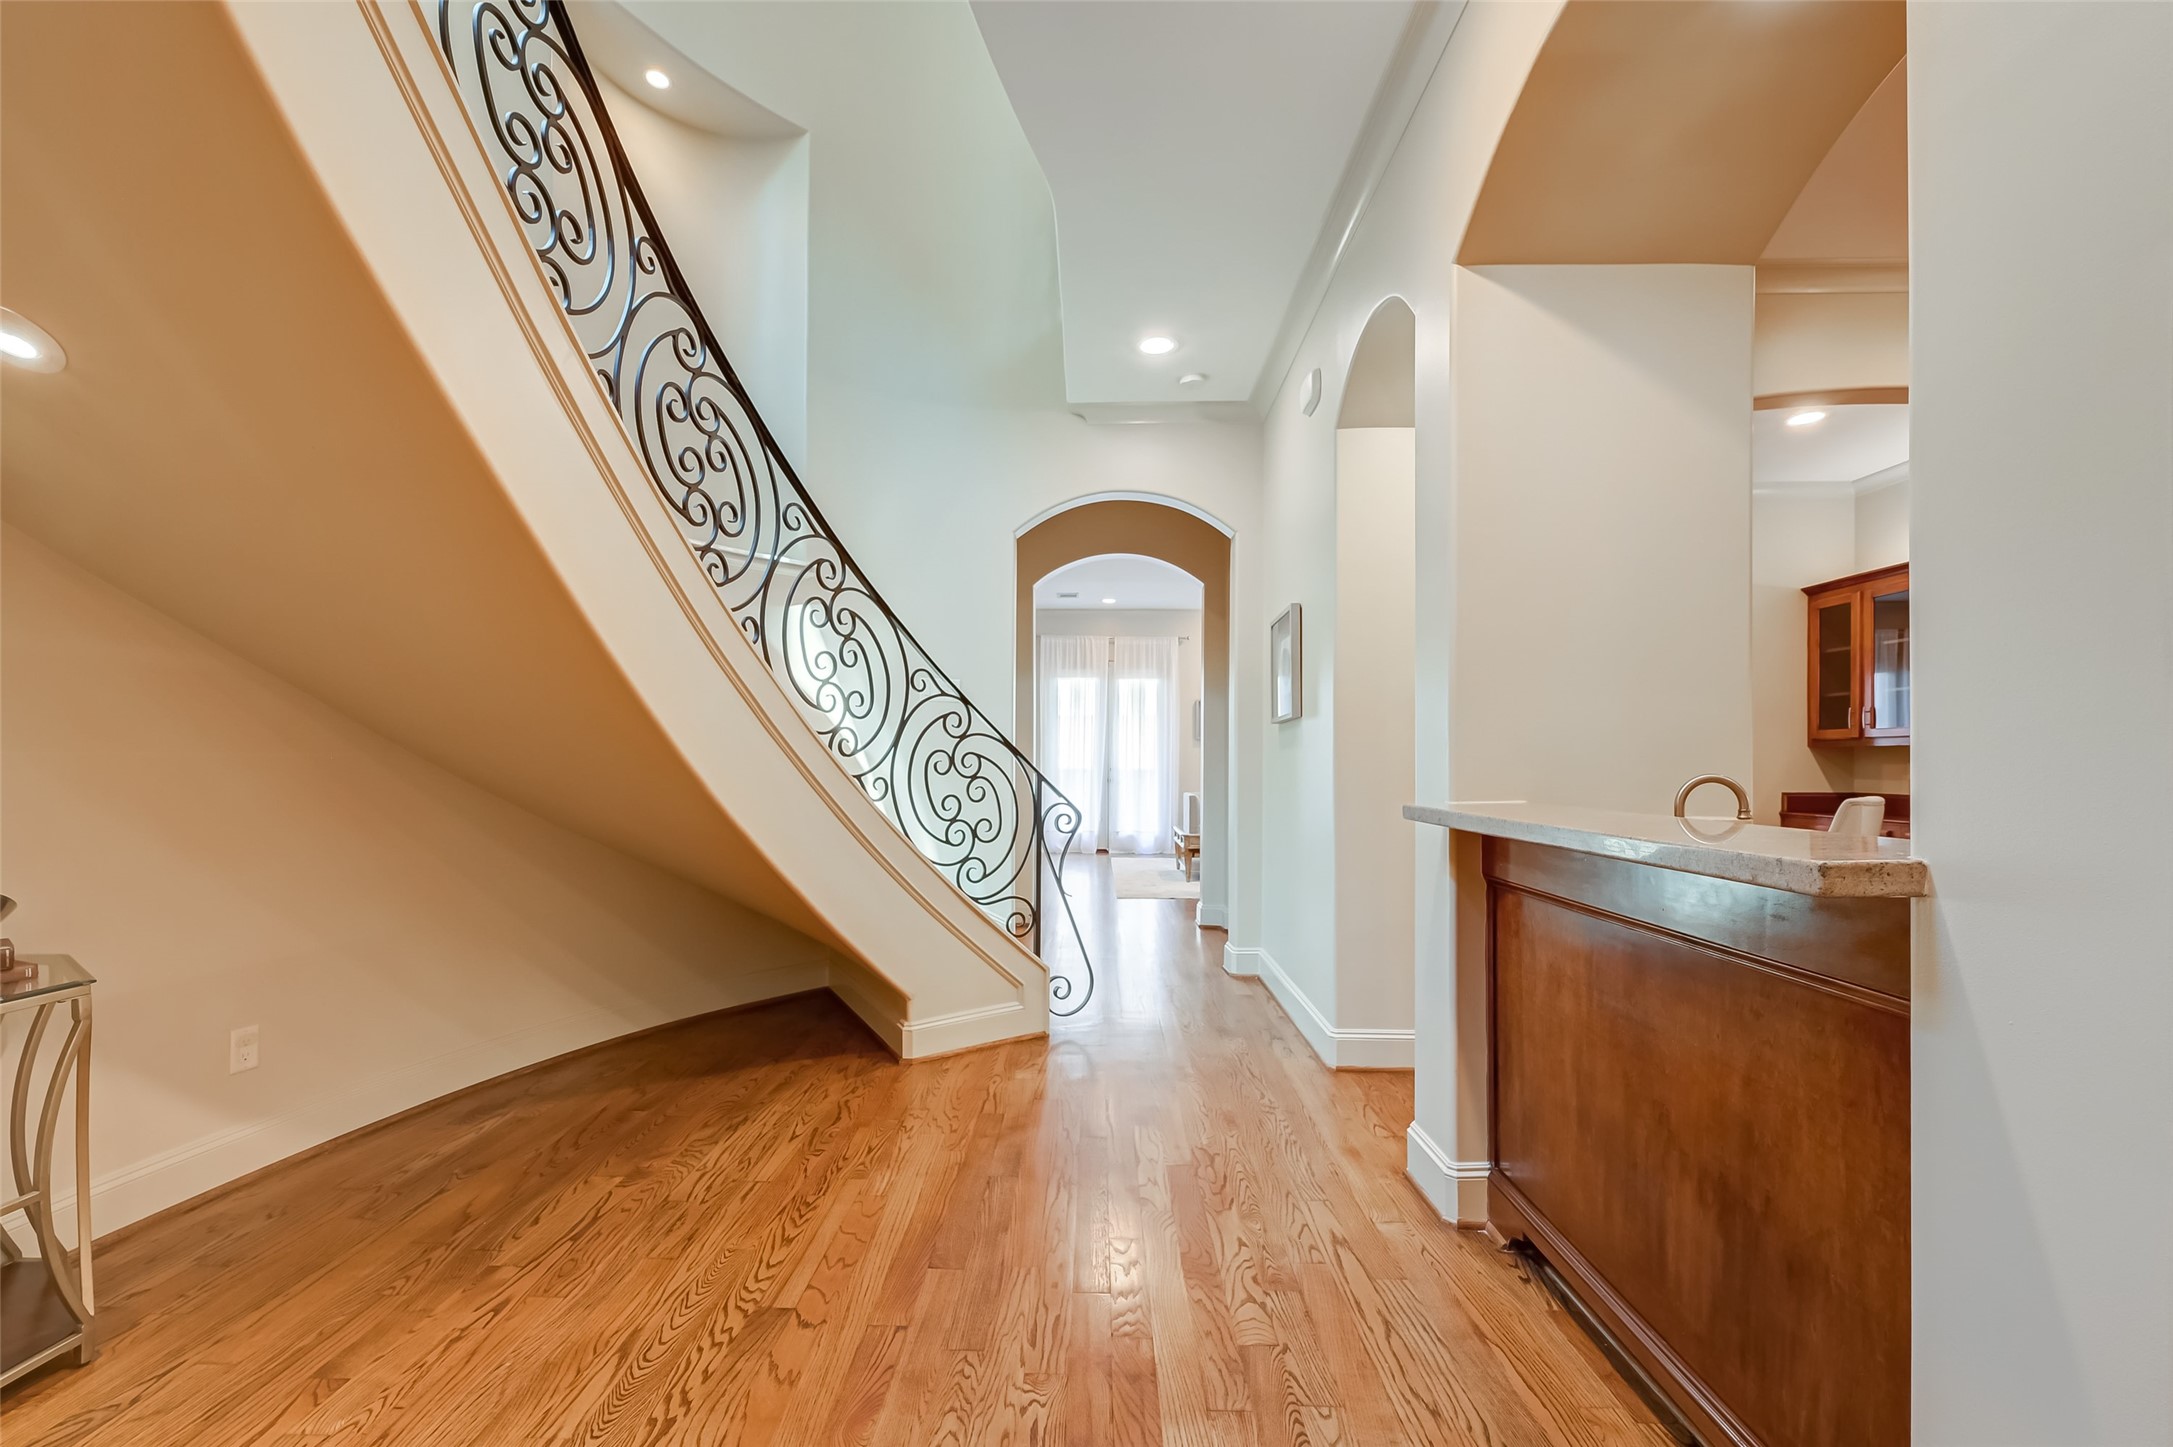 A grand and beautiful entrance way featuring  high ceilings, pristine hardwood & neutral colors. Elevator capable!